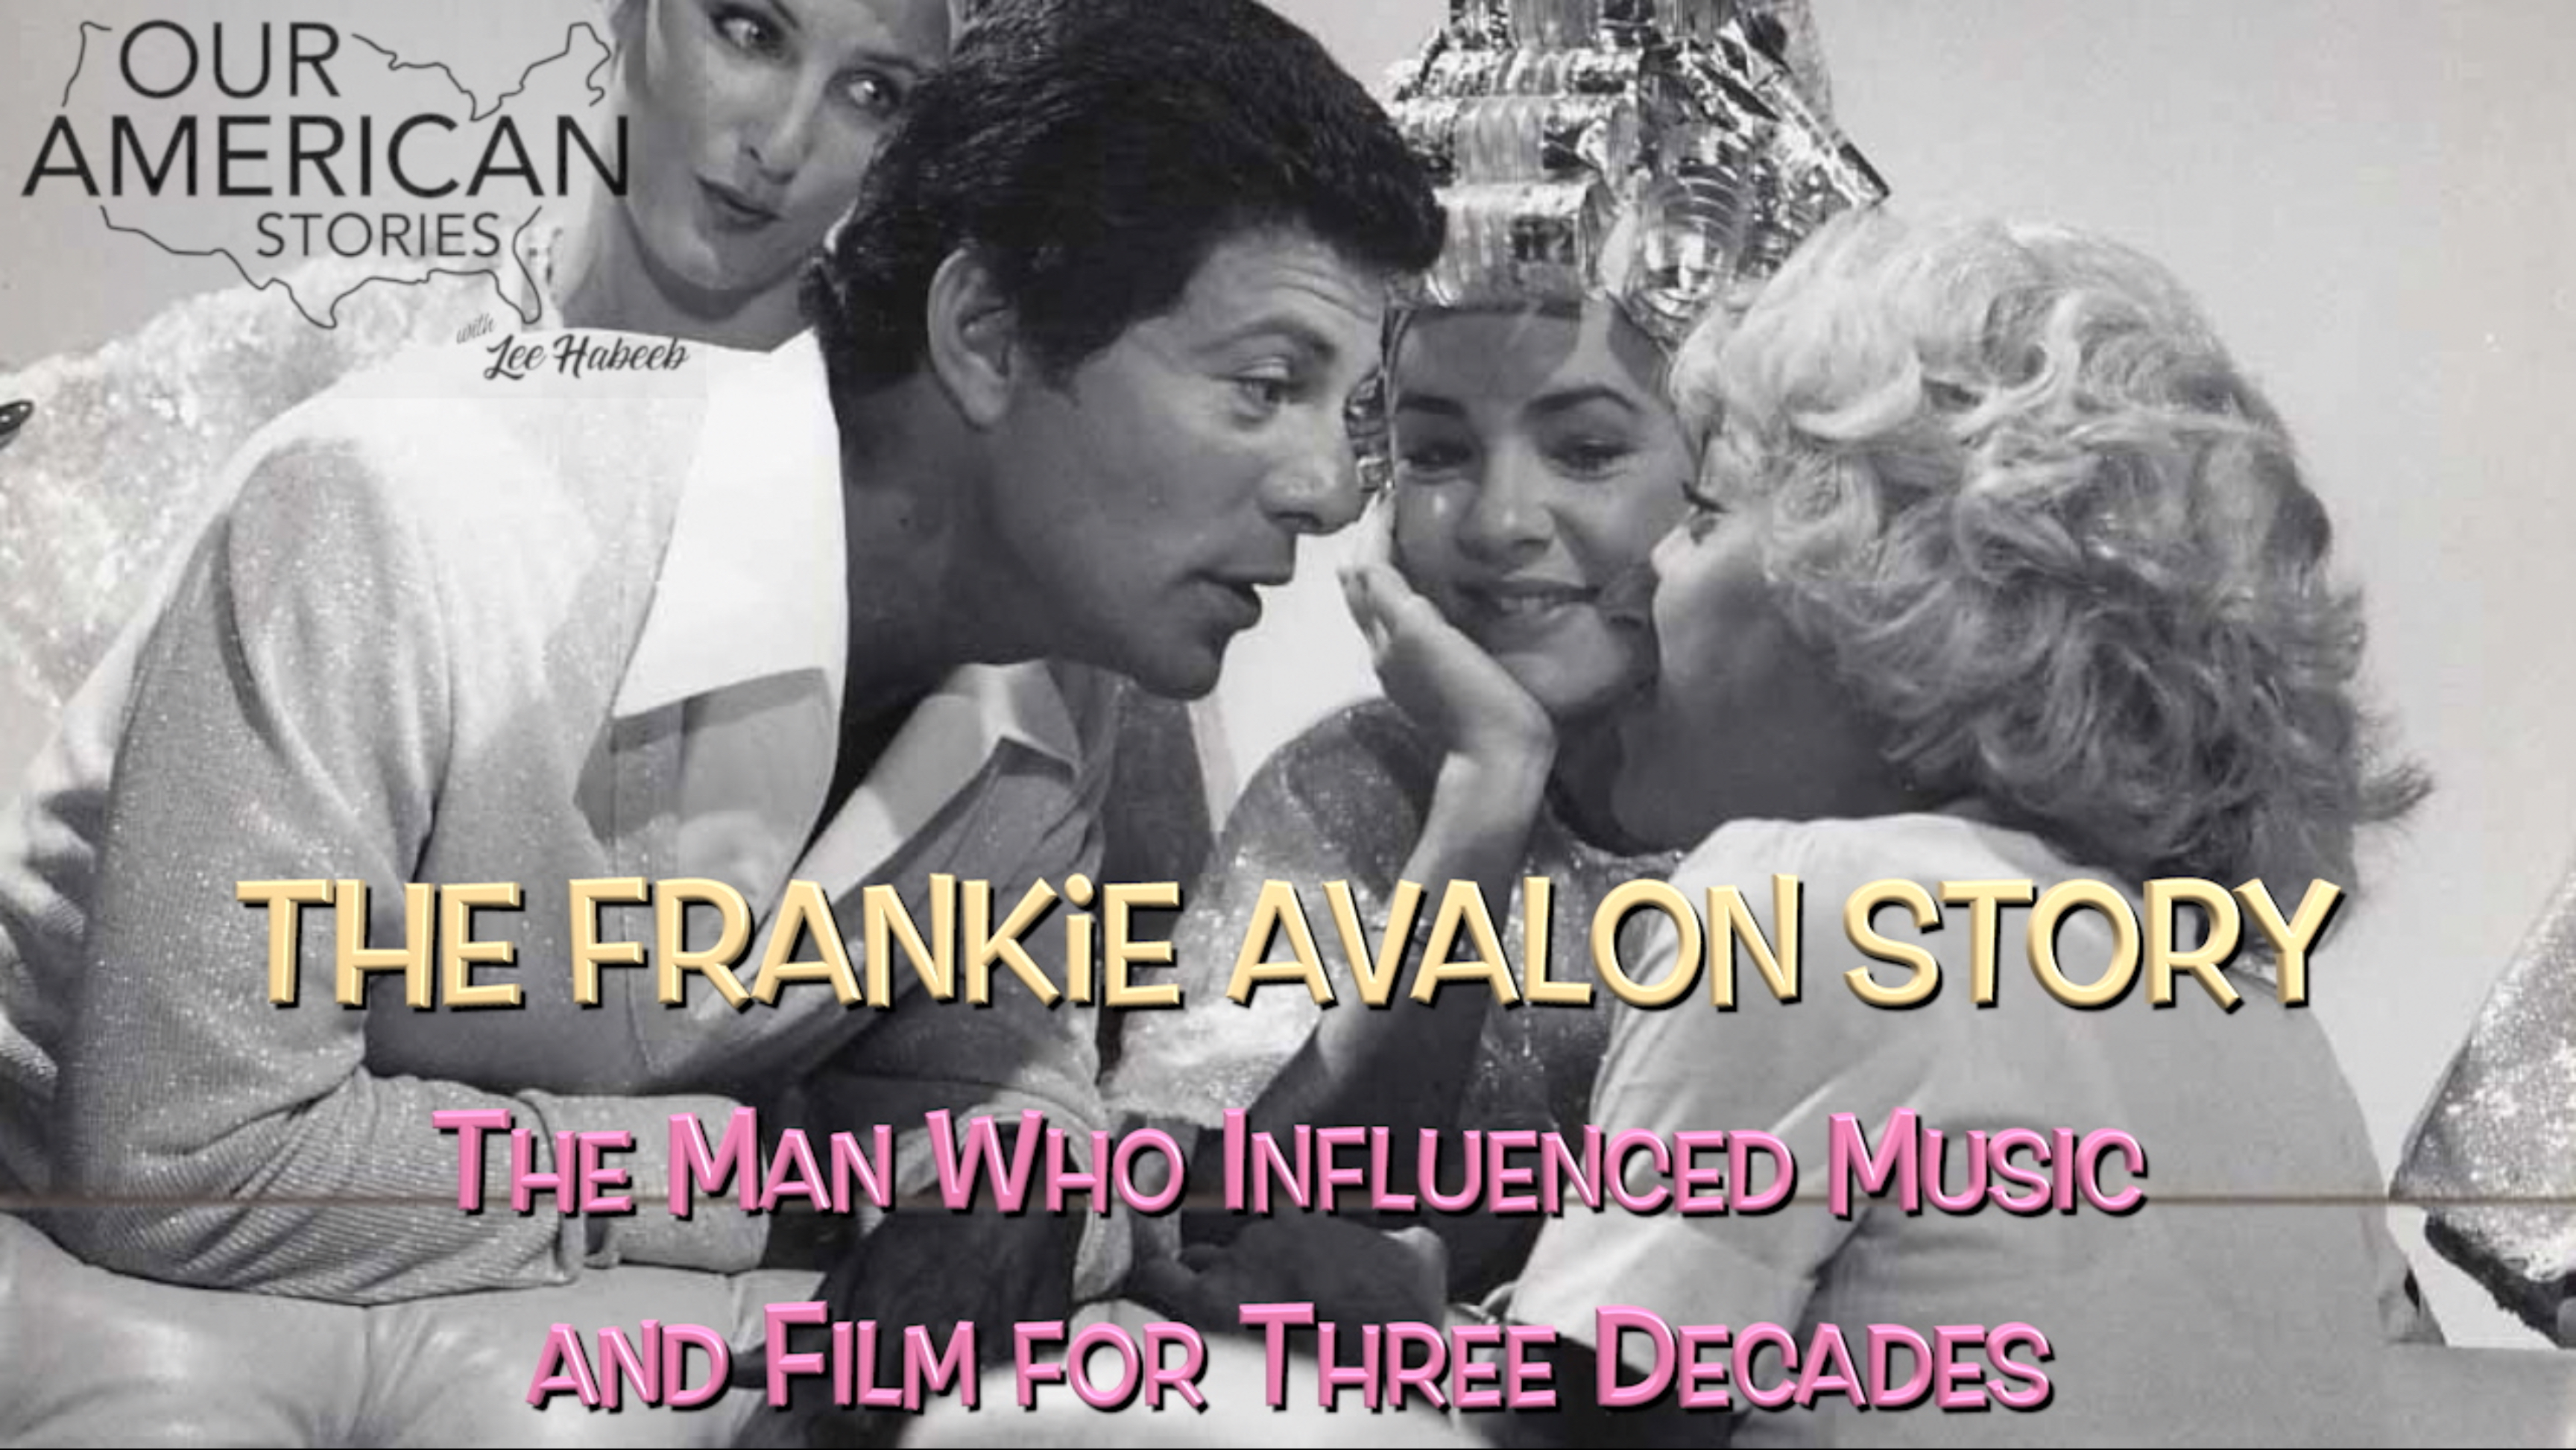 The Frankie Avalon Story: The Man Who Influenced Music and Film for Three Decades